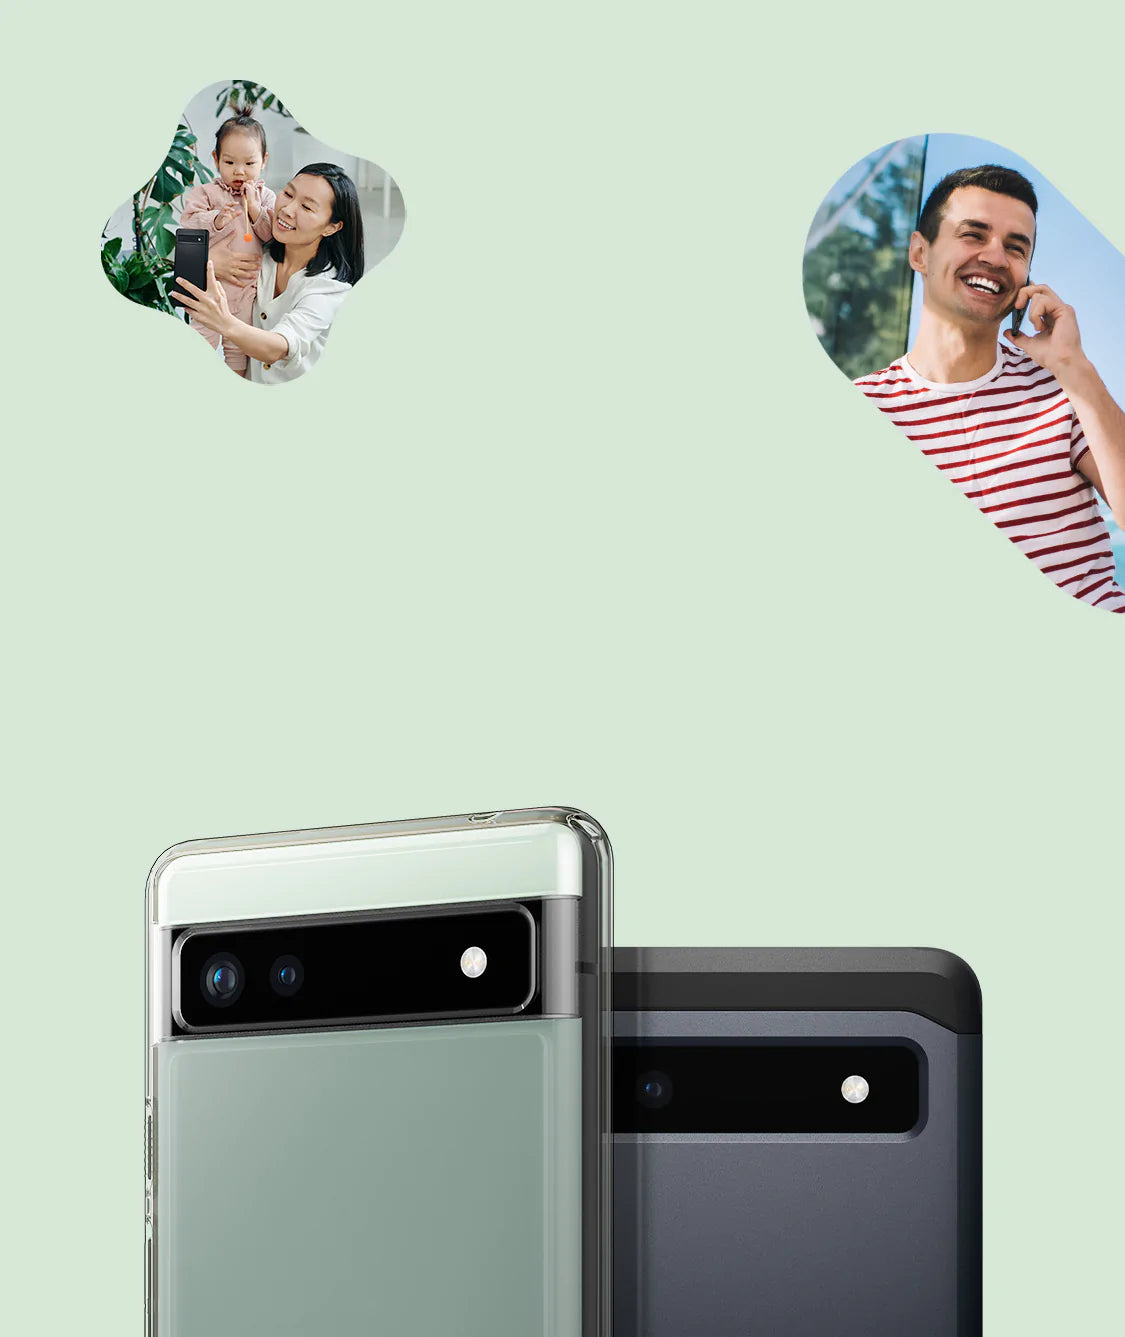 New Google Pixel Case Collection